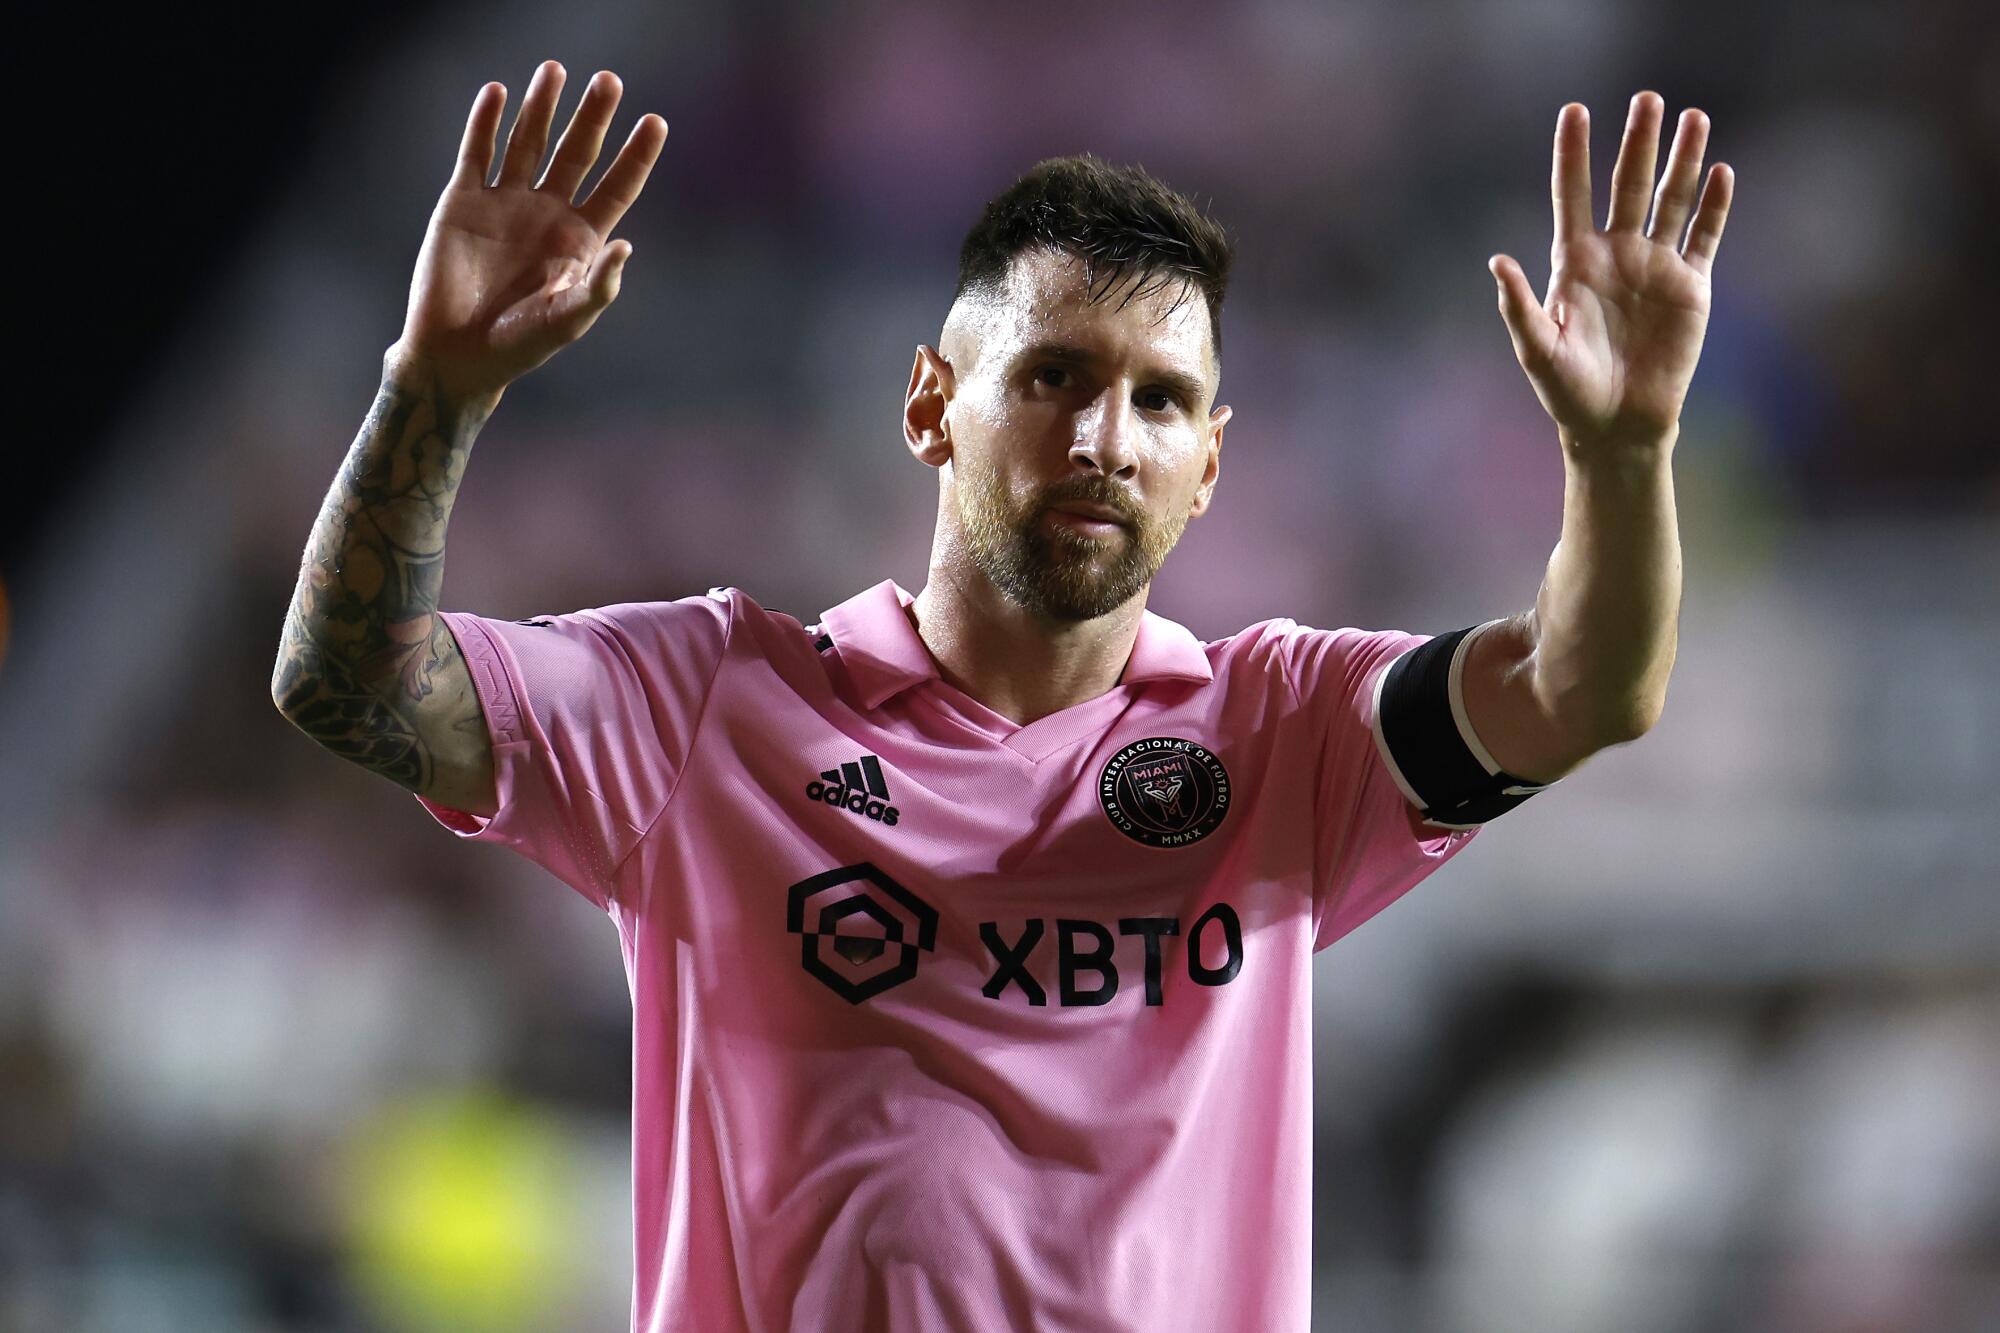 Inter Miami star Lionel Messi waves to fans after a match against Nashville SC on Aug. 30.